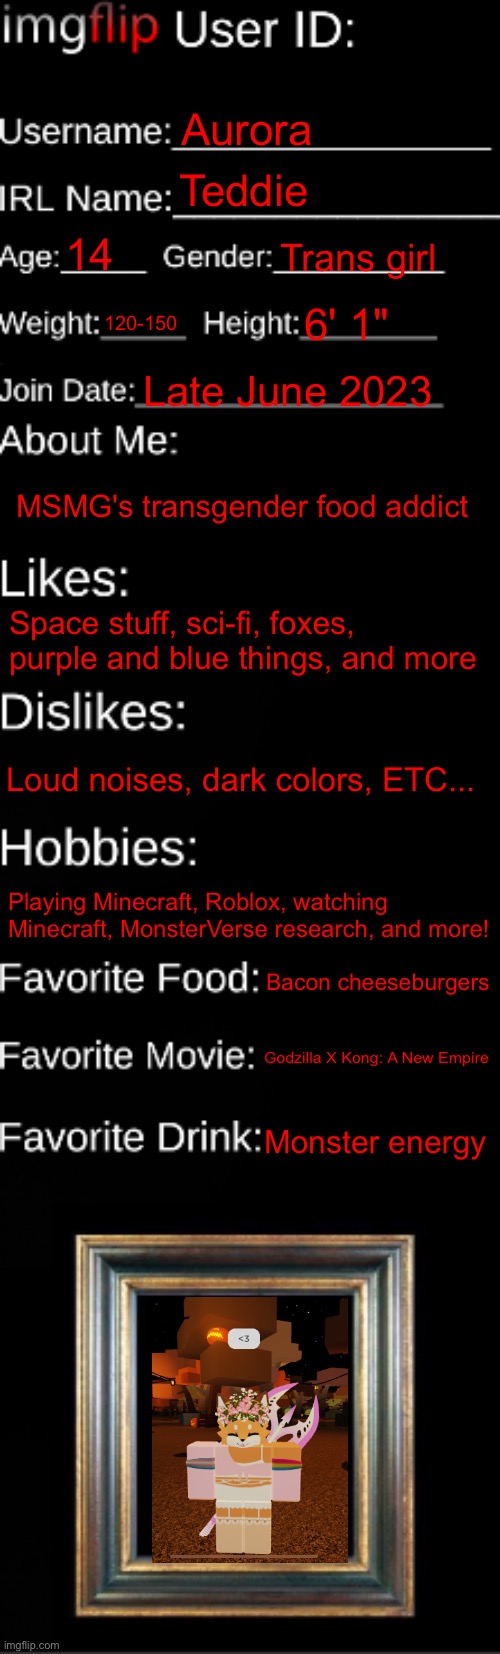 U P D A T E :3 | Aurora; Teddie; 14; Trans girl; 120-150; 6' 1"; Late June 2023; MSMG's transgender food addict; Space stuff, sci-fi, foxes, purple and blue things, and more; Loud noises, dark colors, ETC... Playing Minecraft, Roblox, watching Minecraft, MonsterVerse research, and more! Bacon cheeseburgers; Godzilla X Kong: A New Empire; Monster energy | image tagged in imgflip id card | made w/ Imgflip meme maker